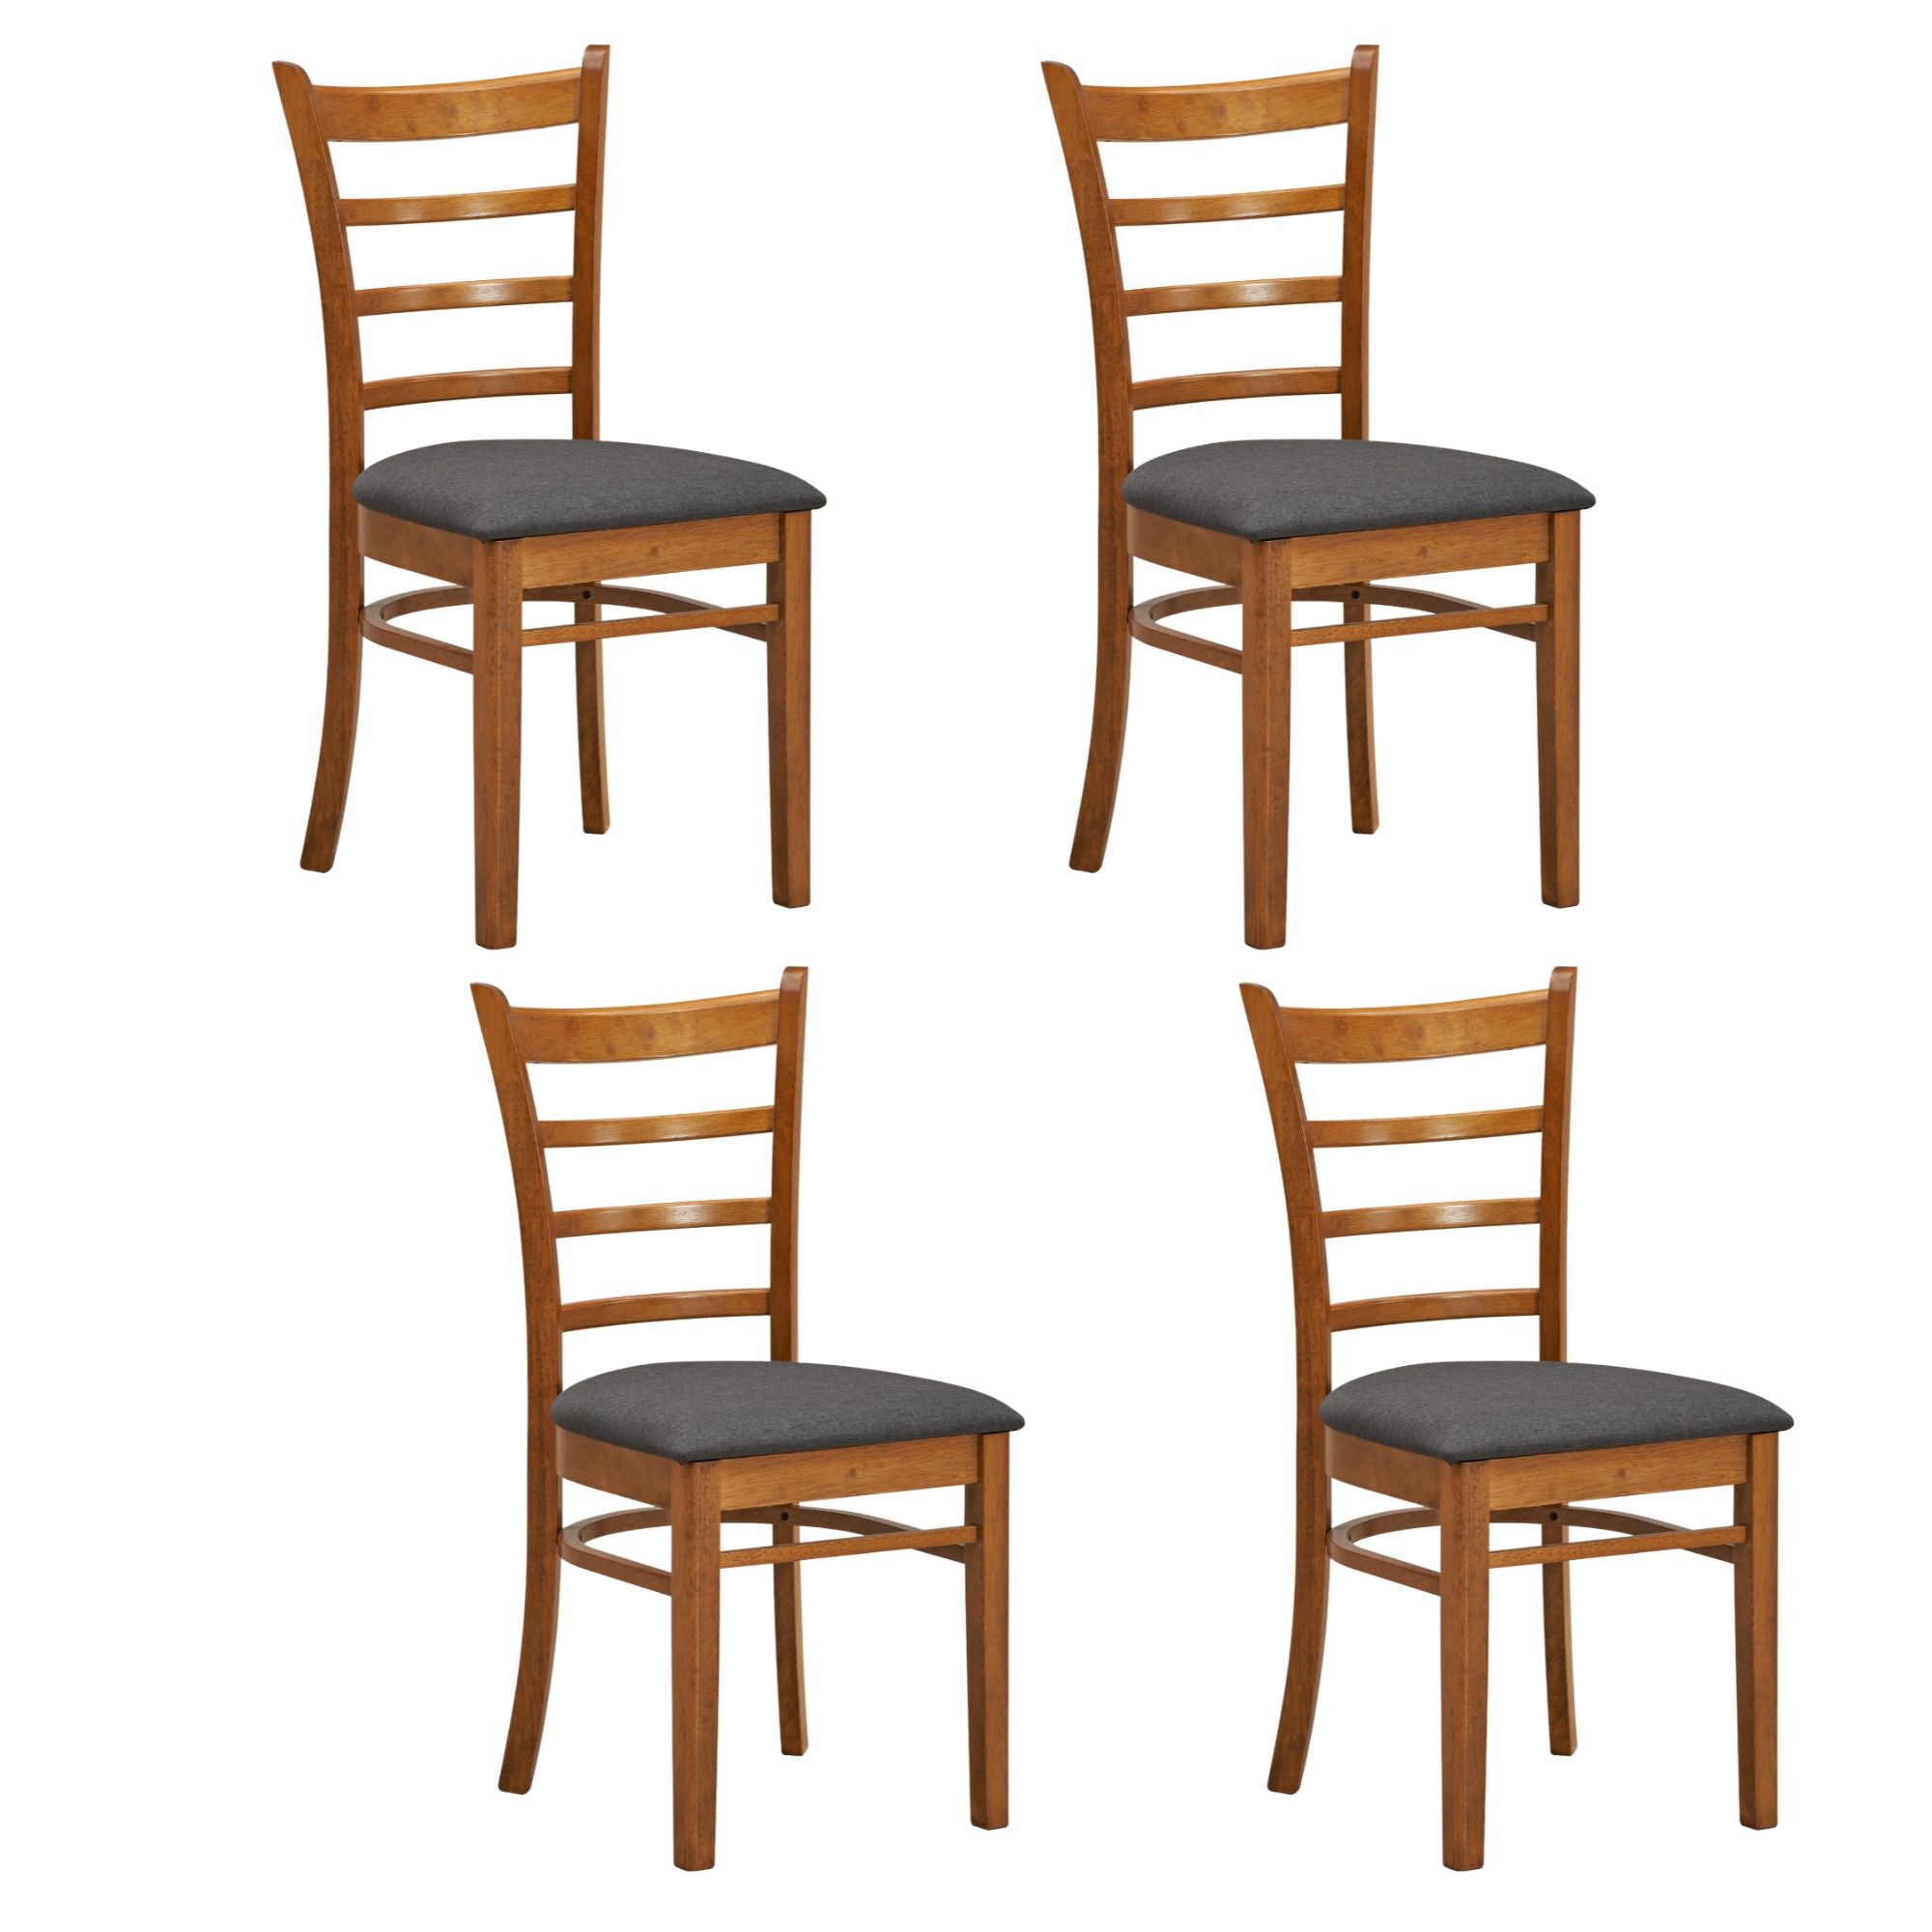 Linaria Dining Chair Set of 4 Crossback Solid Rubber Wood Fabric Seat - Walnut